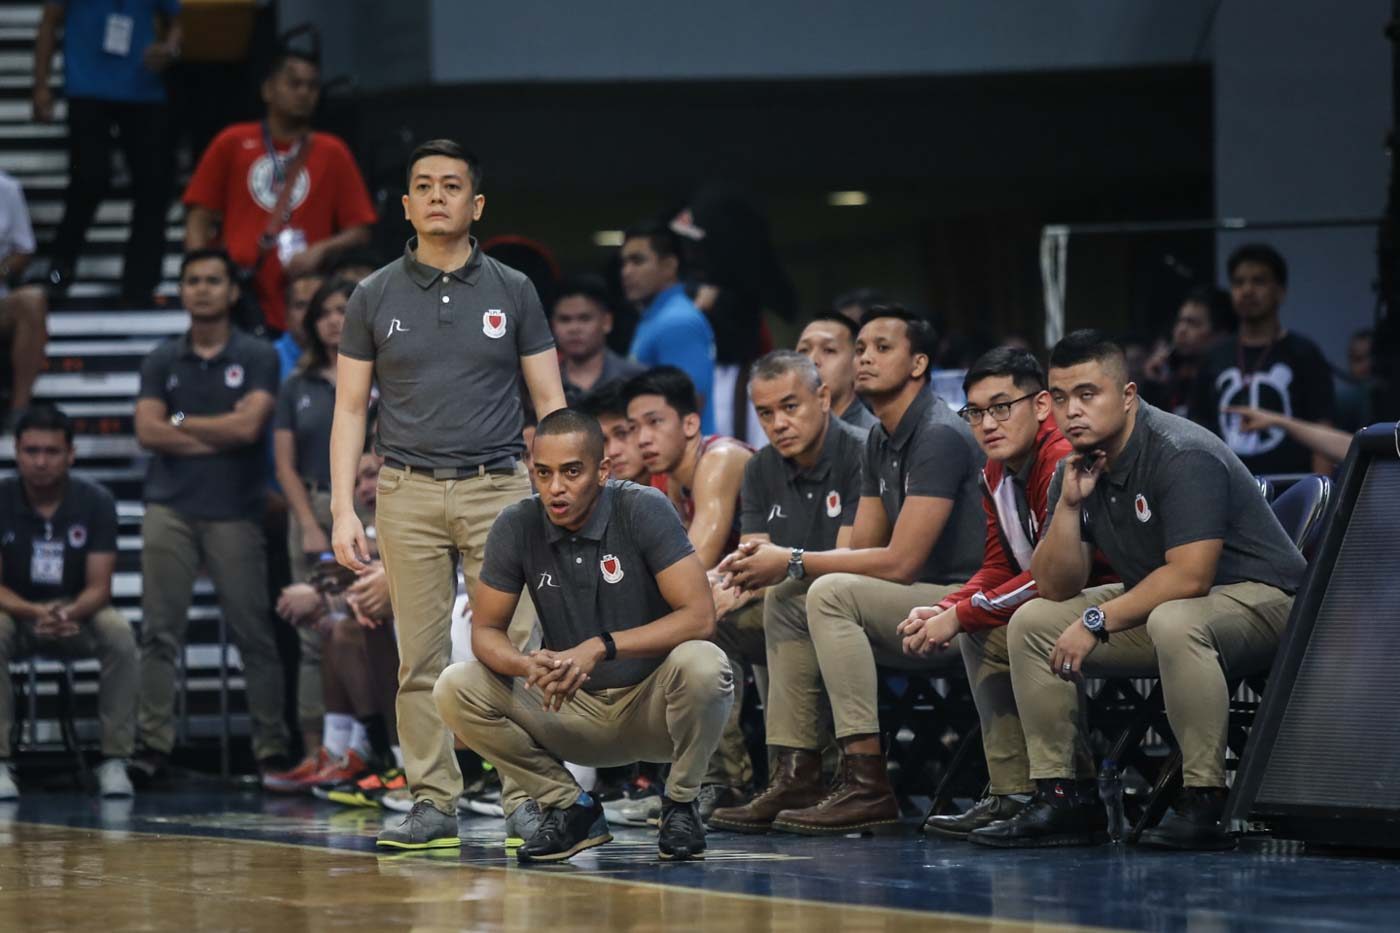 Jeff Perlas named Lyceum coach as Topex Robinson leads Phoenix